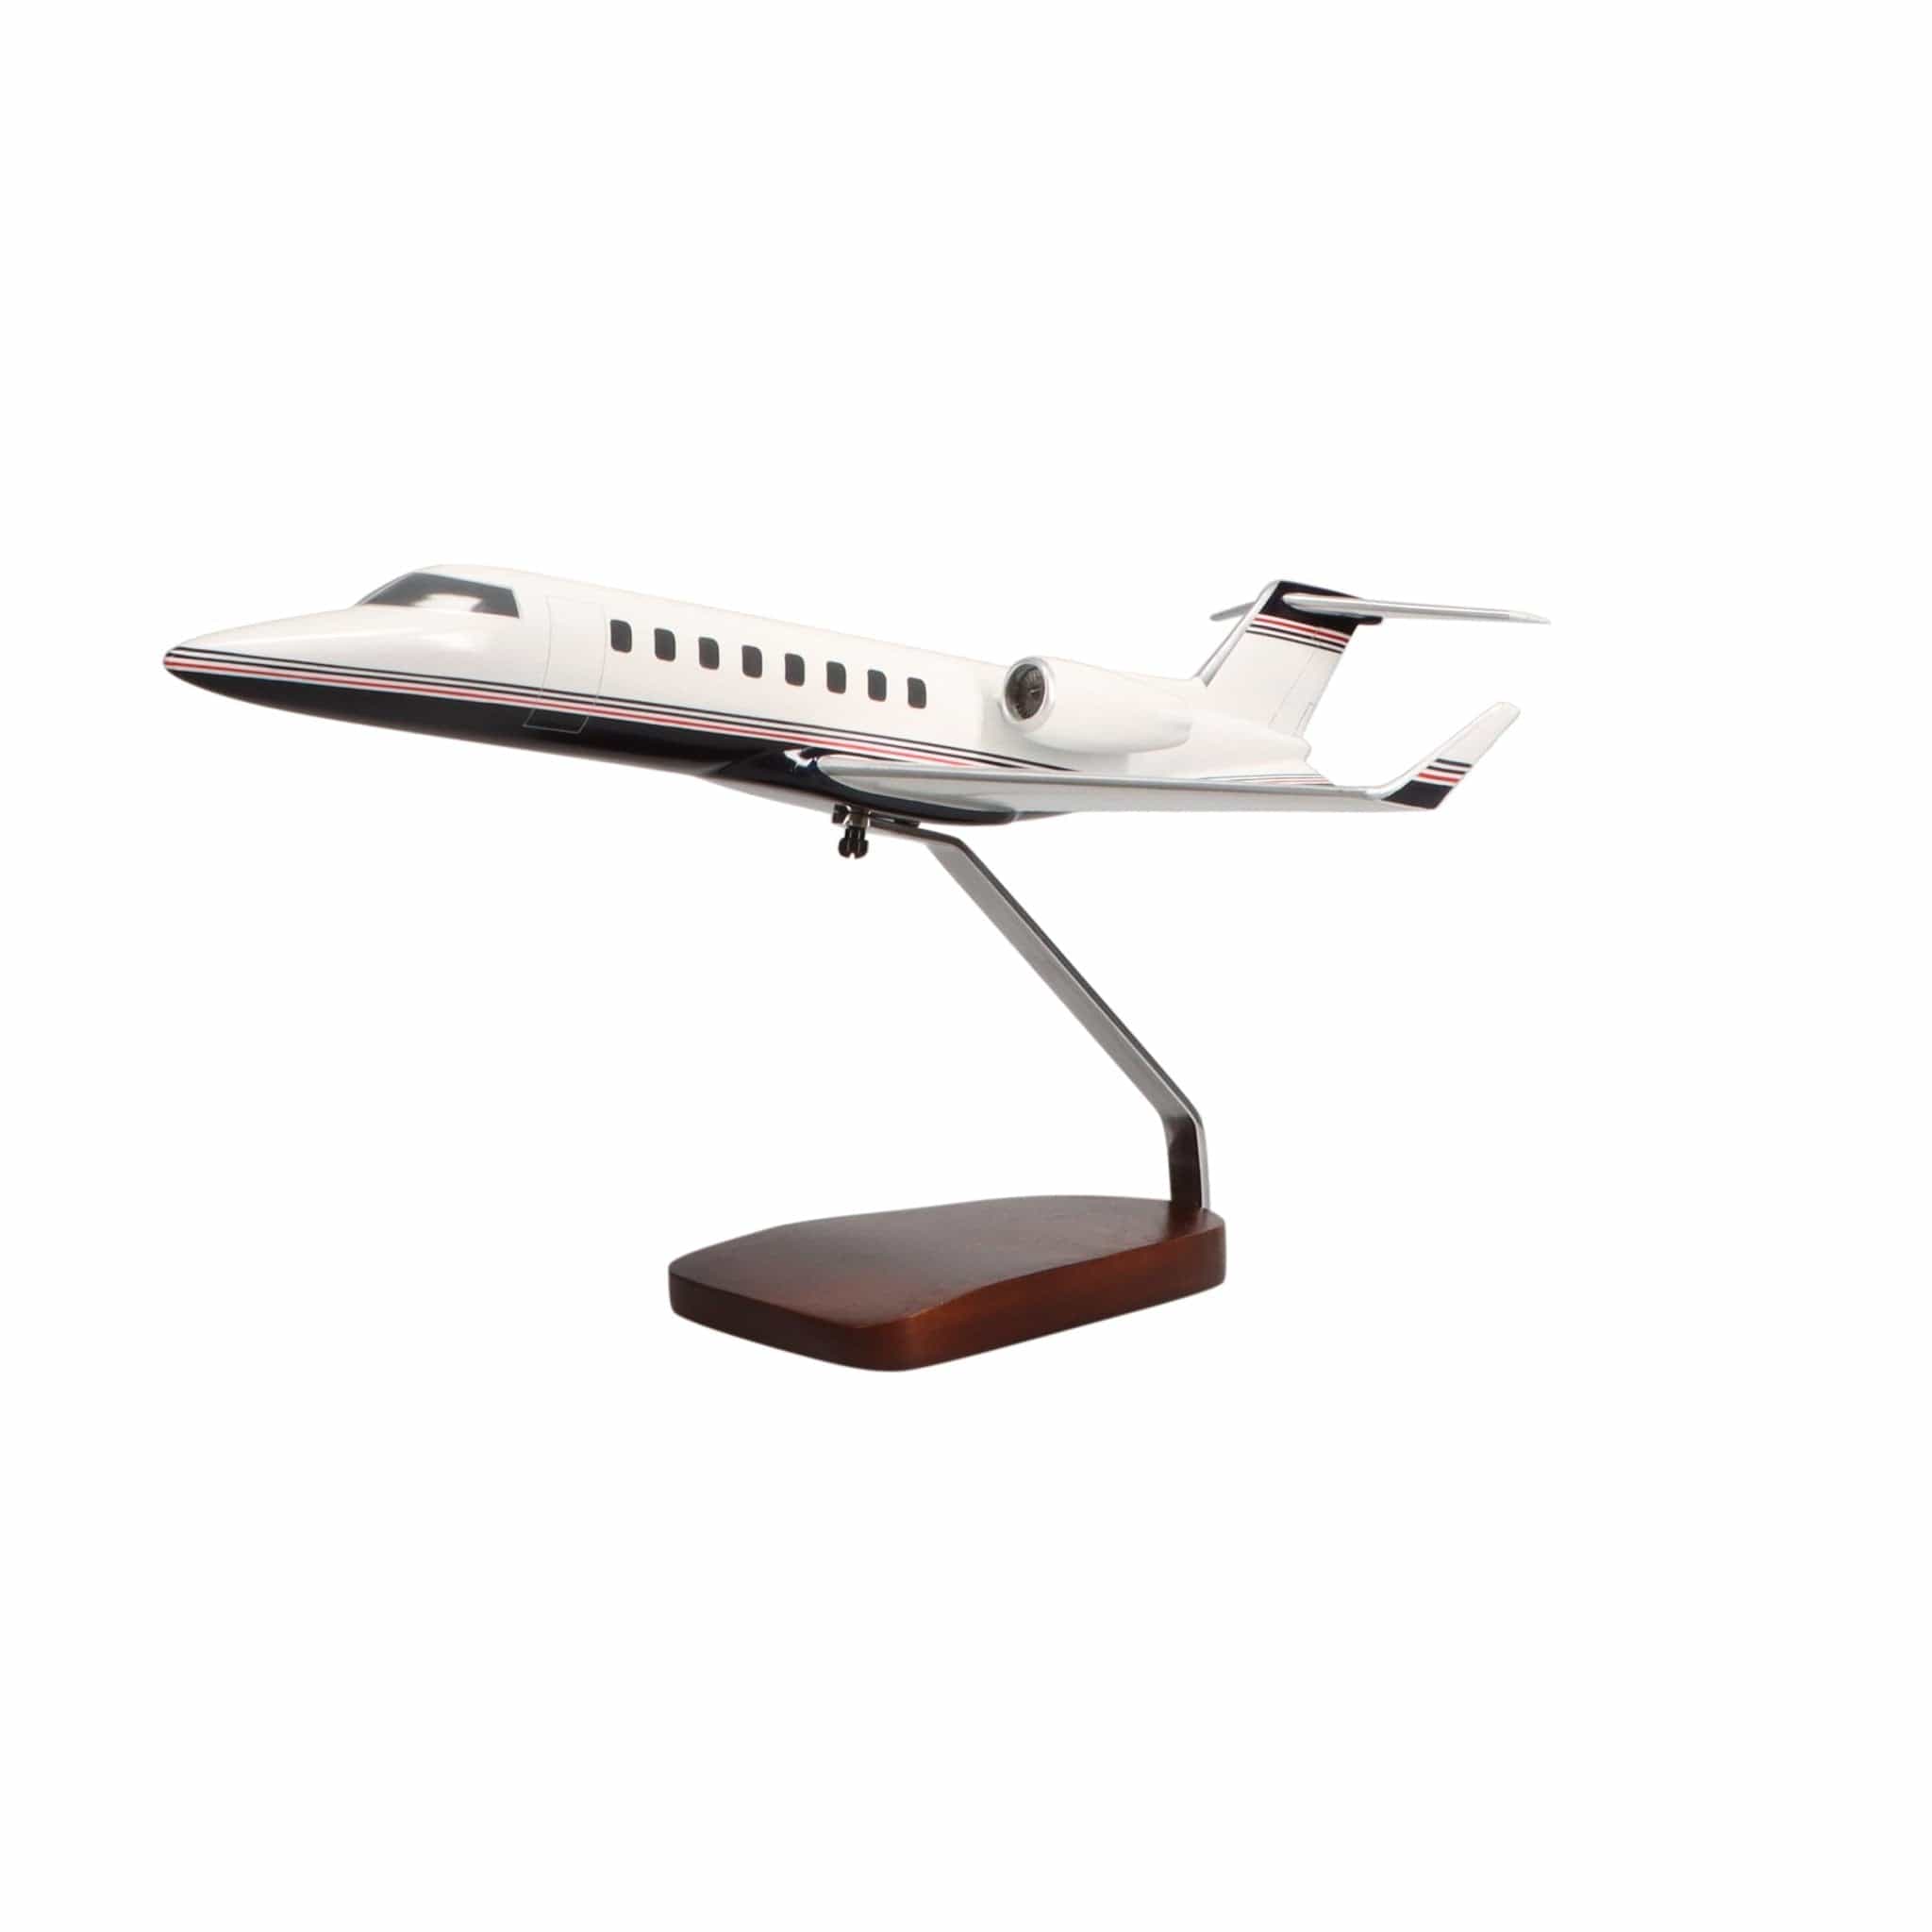 Learjet 45 (Navy, Red) Limited Edition Large Mahogany Model - PilotMall.com